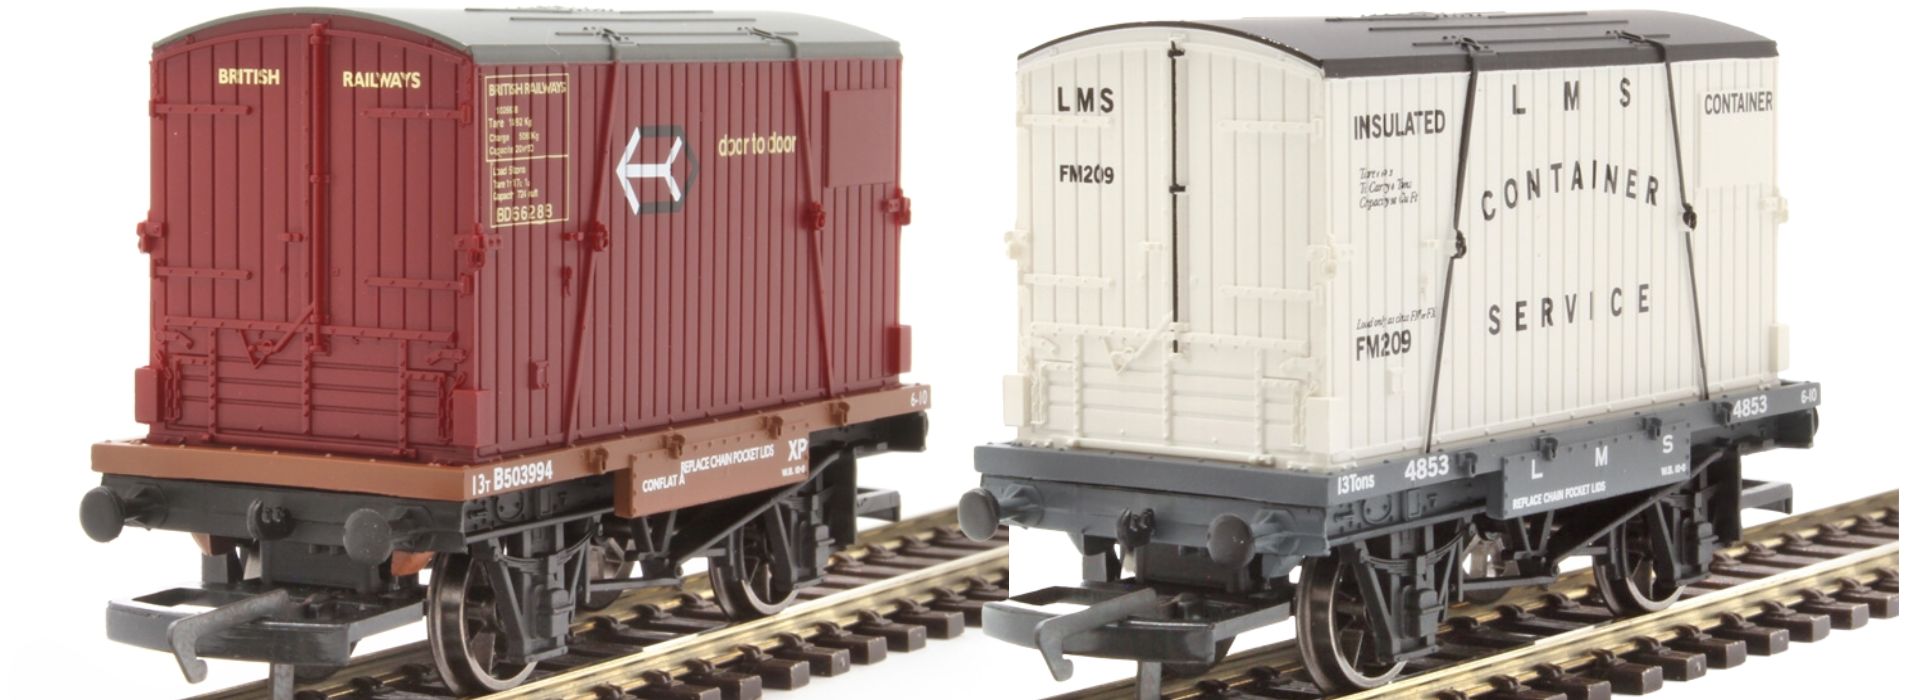 Airfix GMR (Great Model Railways) OO Conflat container flat